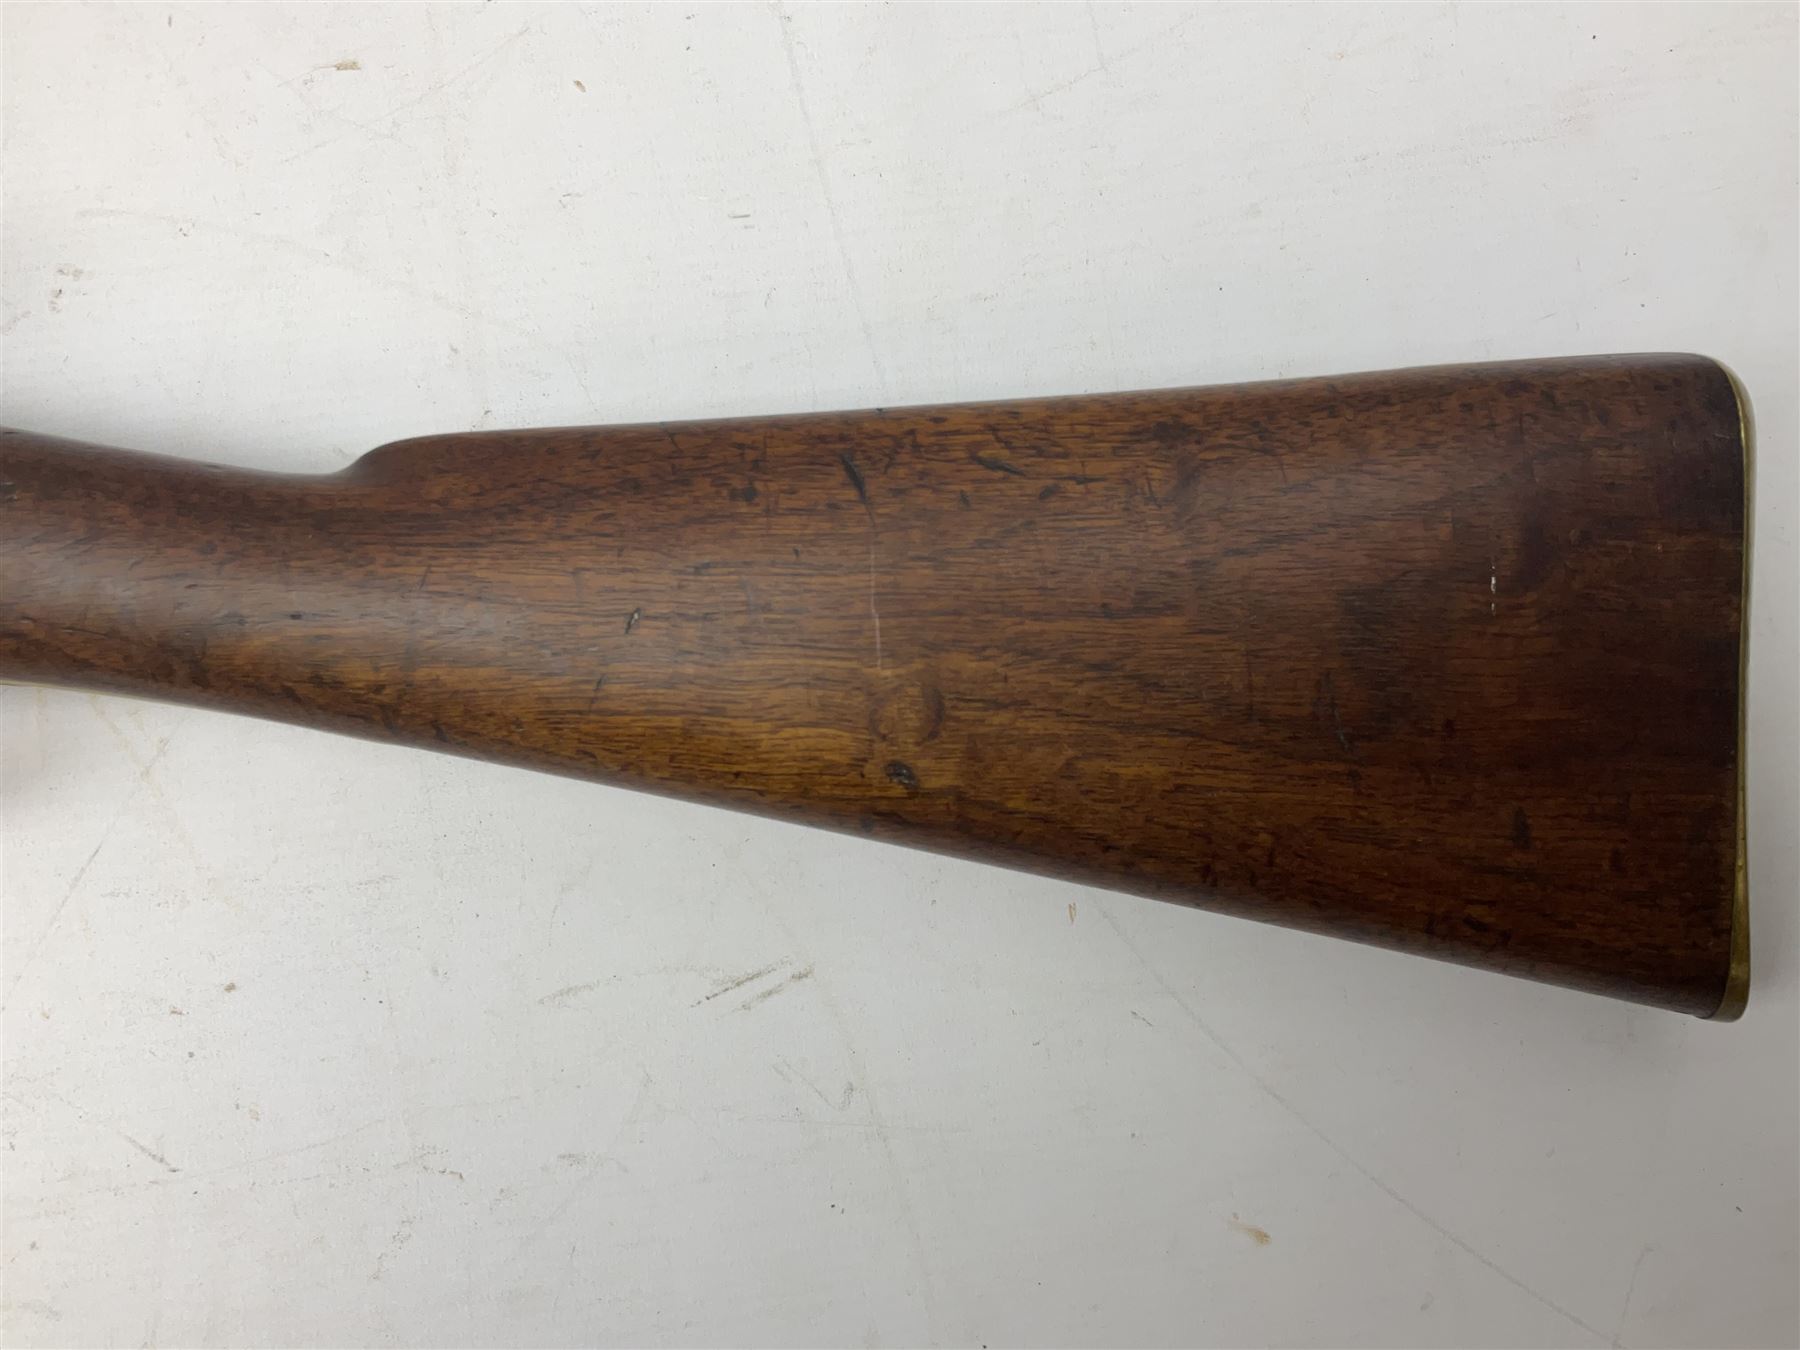 19th century Wilkinson London .577 Enfield P53 muzzle loading percussion gun with 99cm three-grooved - Image 10 of 16